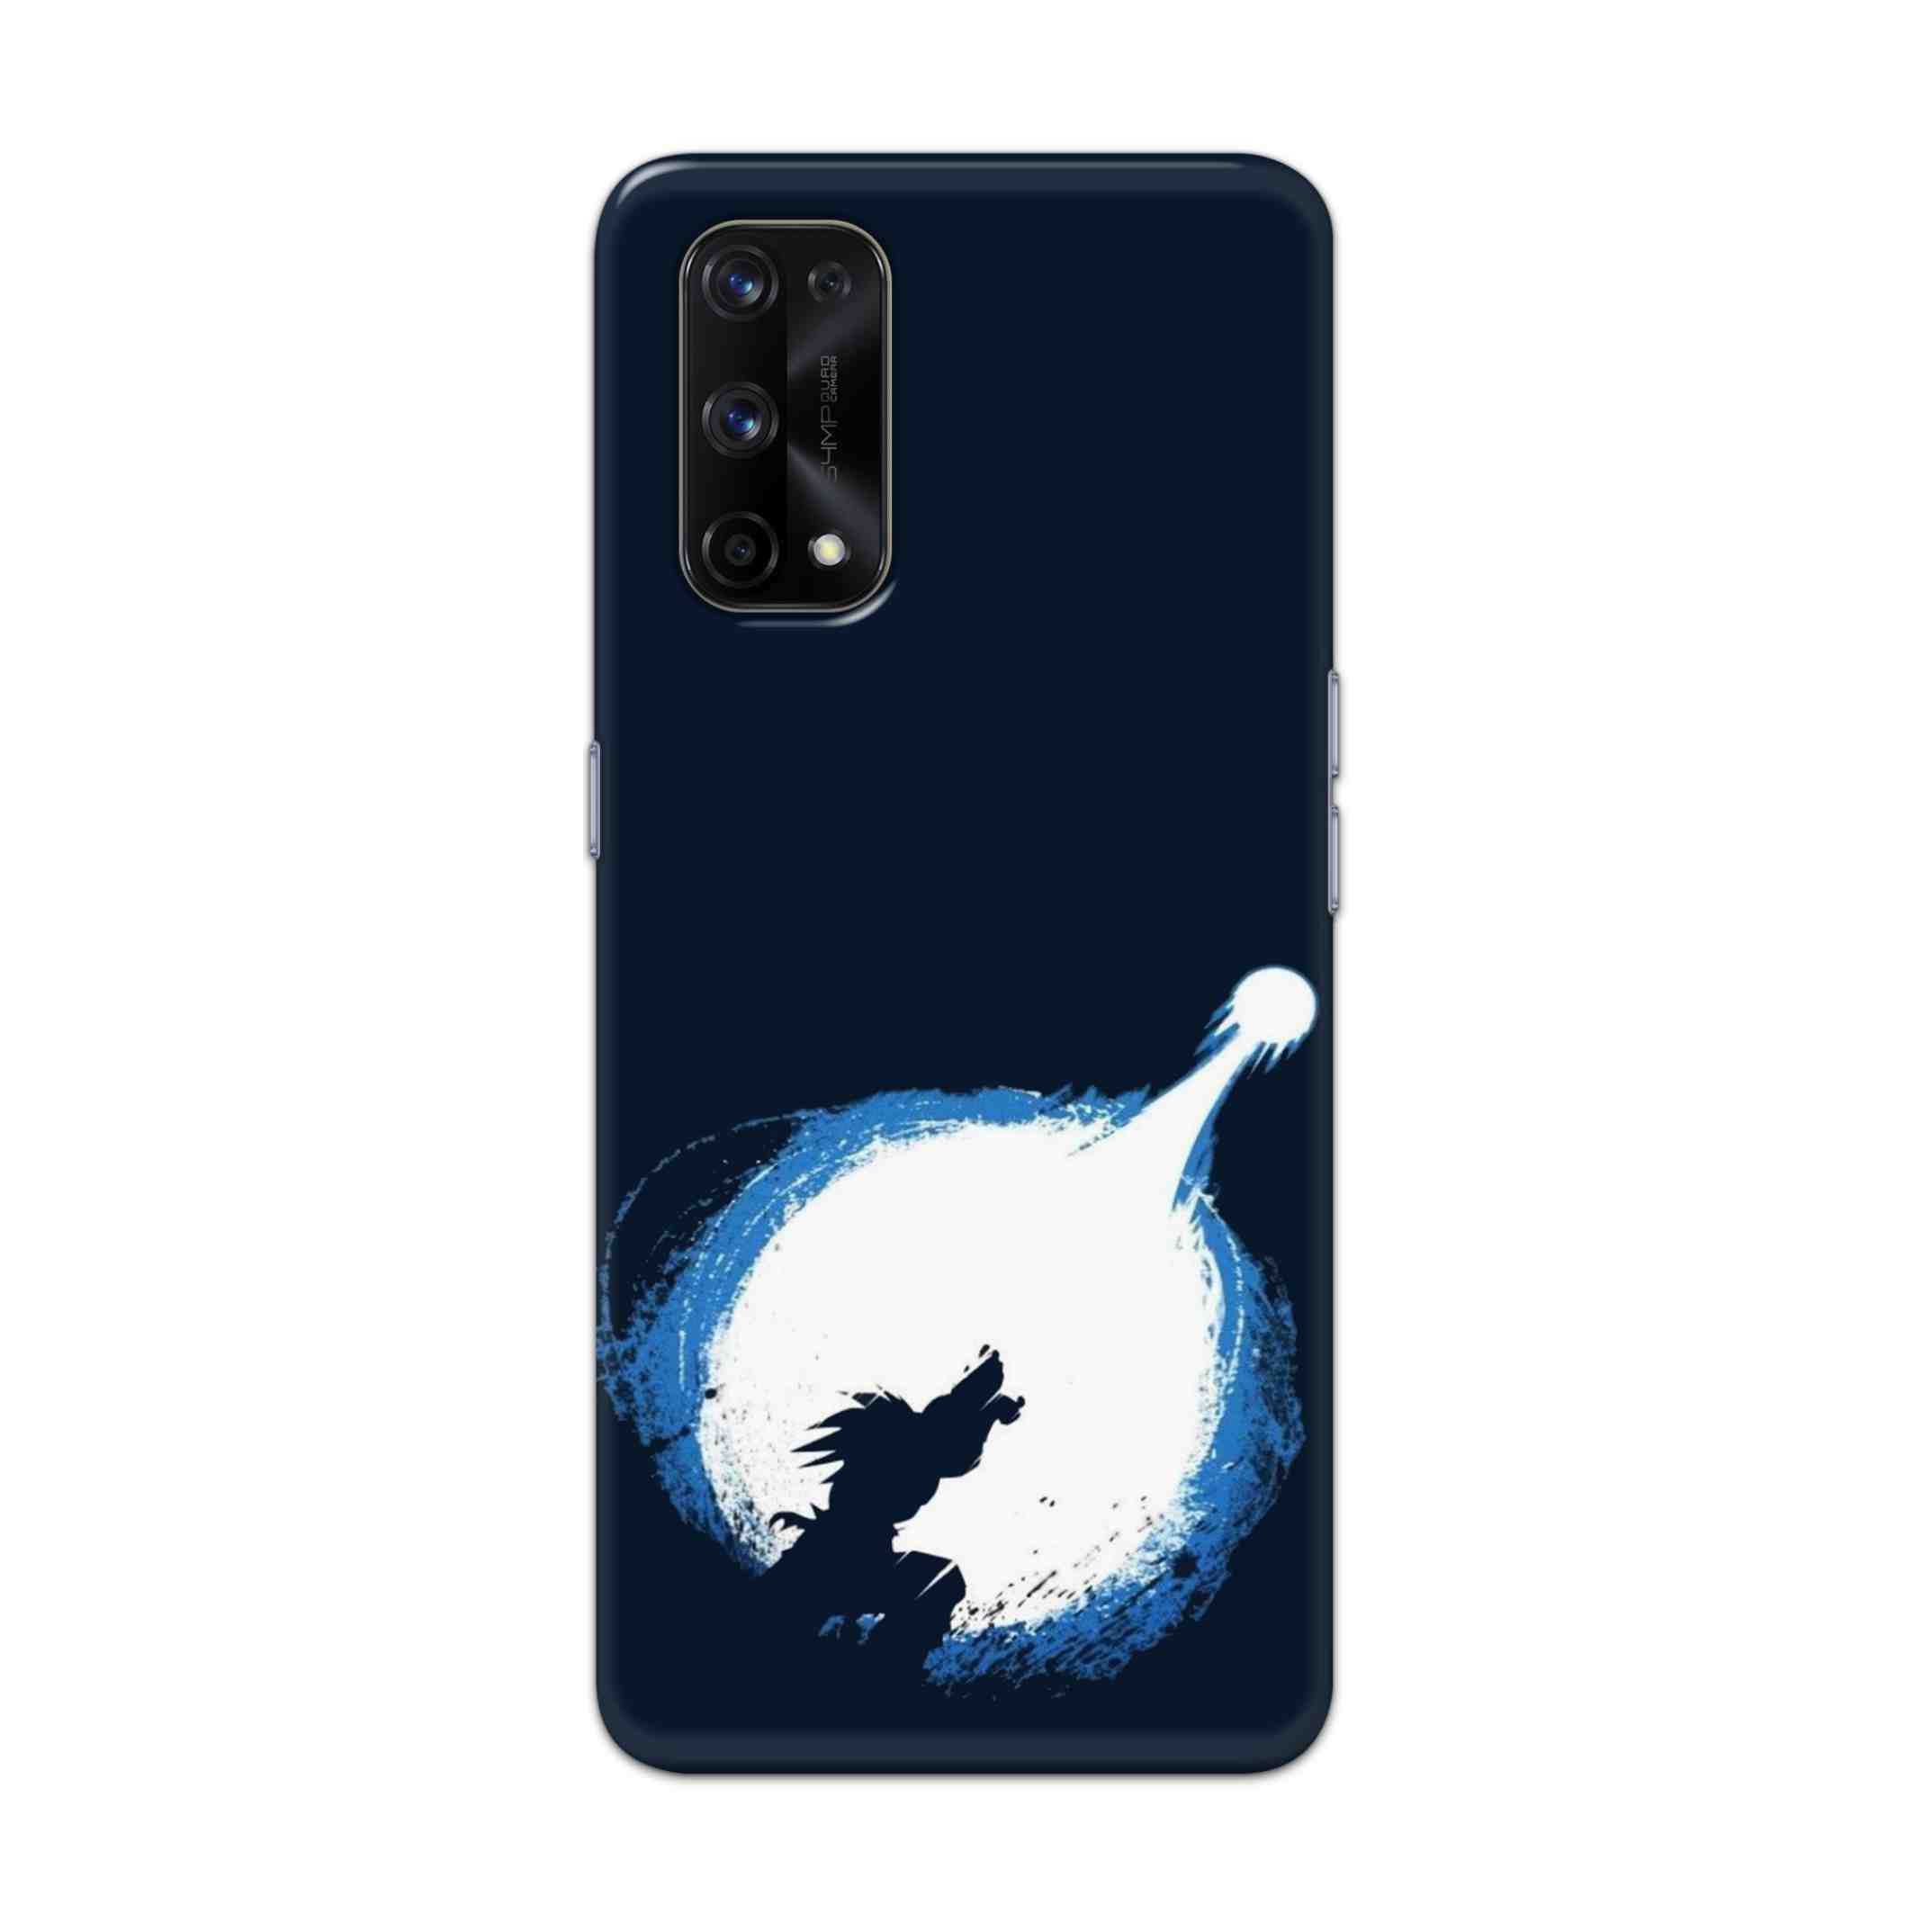 Buy Goku Power Hard Back Mobile Phone Case Cover For Realme X7 Pro Online